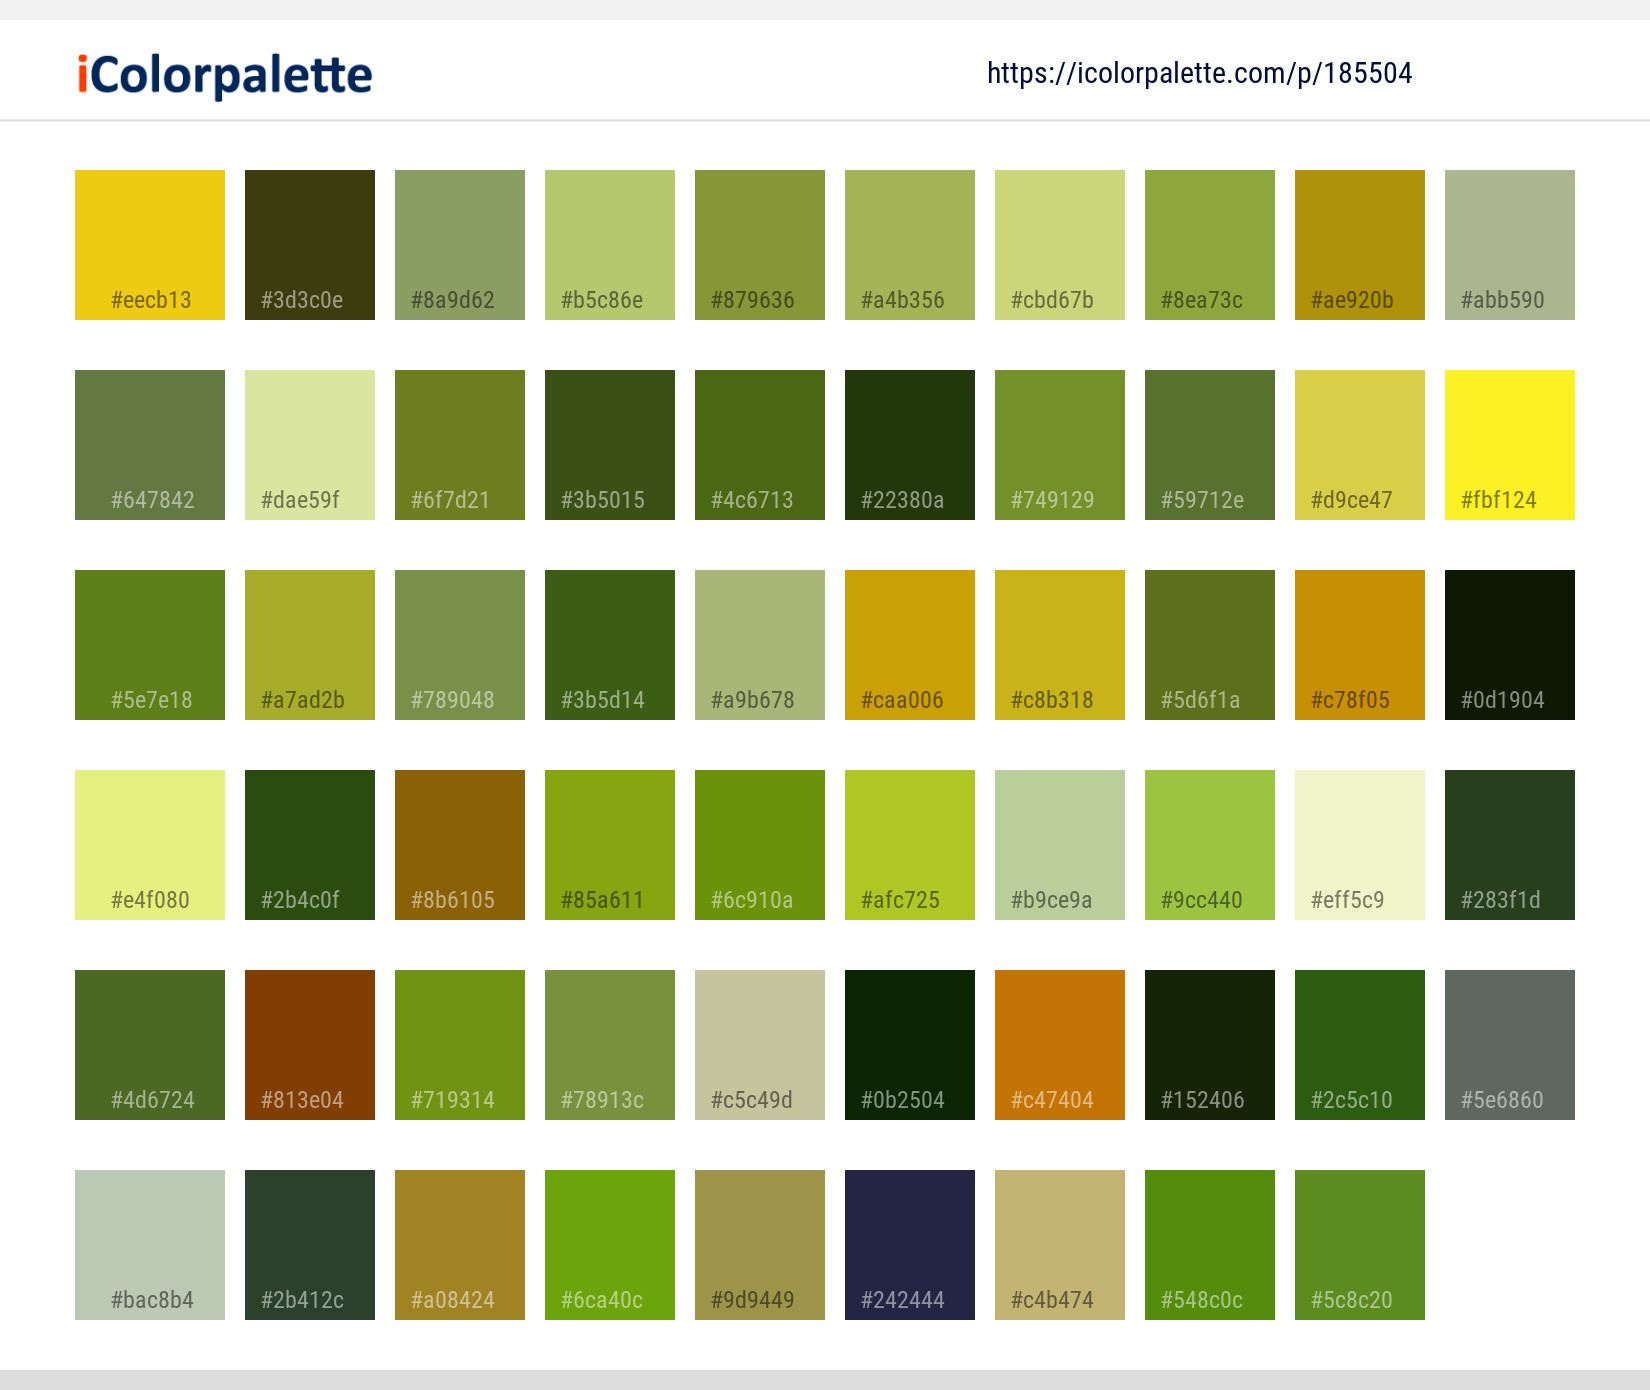 Color Palette Ideas from Plant Flower Sunflower Image | iColorpalette